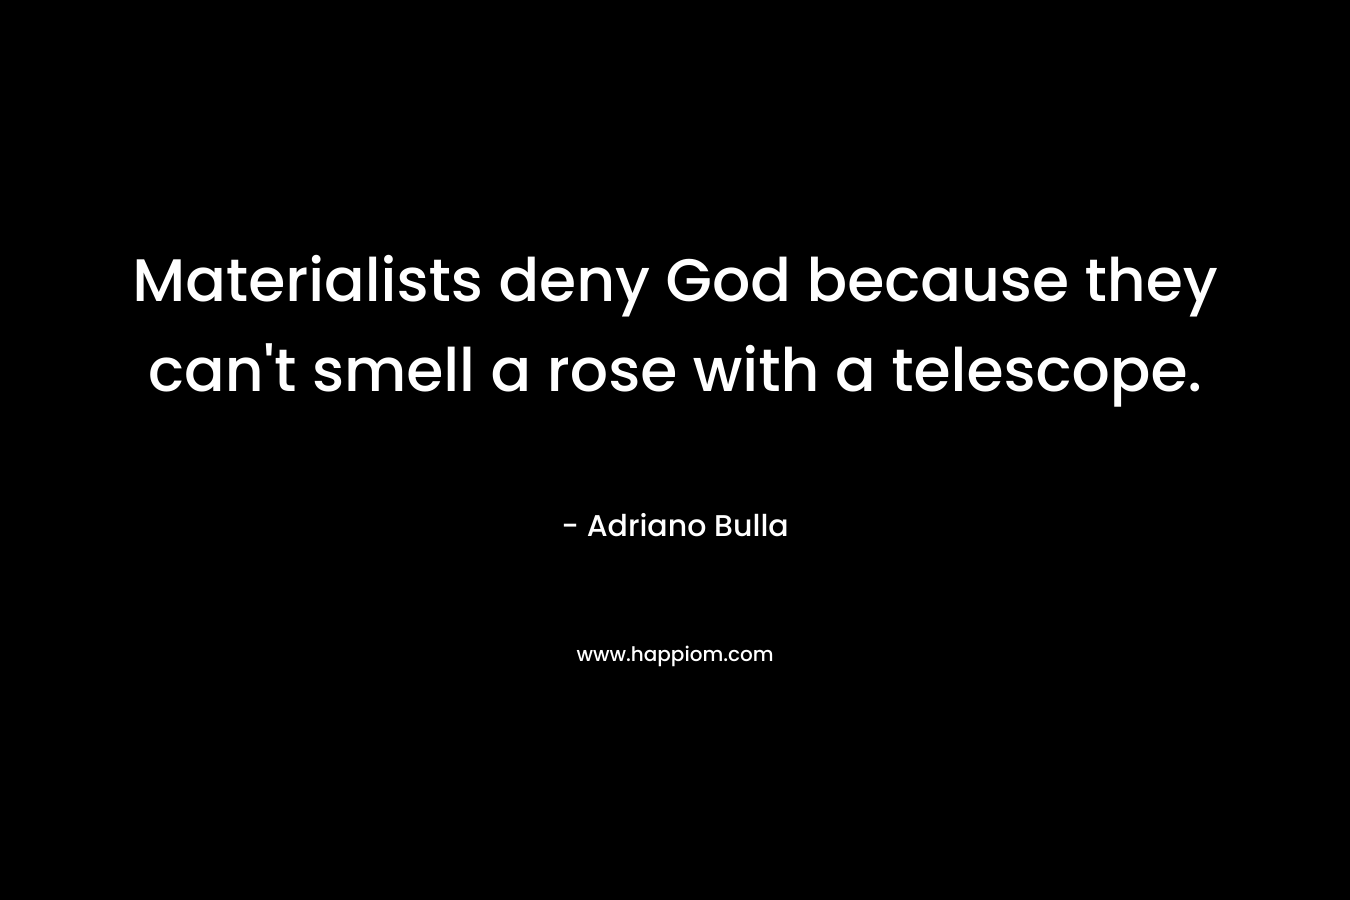 Materialists deny God because they can’t smell a rose with a telescope. – Adriano Bulla